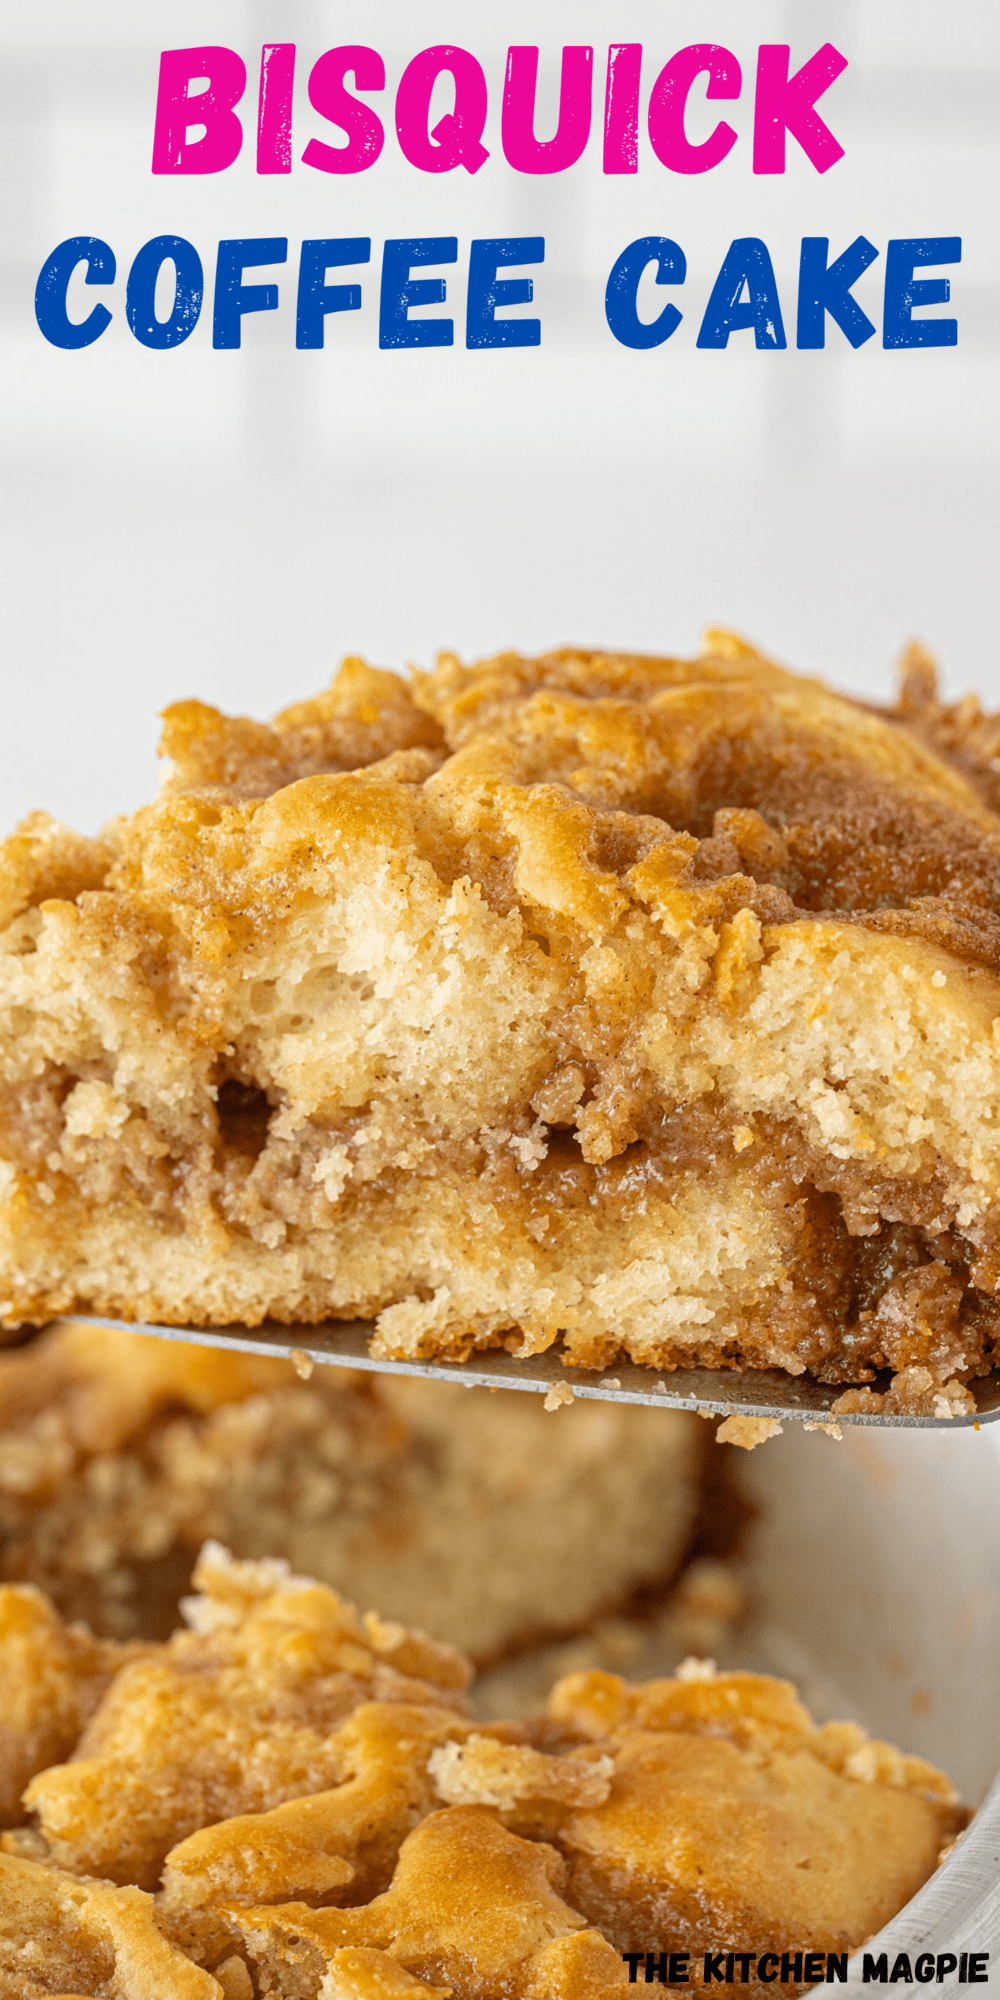 How to make classic Bisquick™ Coffee Cake. This recipe is best eaten right after it is baked, and is the first cake that many of us learned to bake when we were kids!